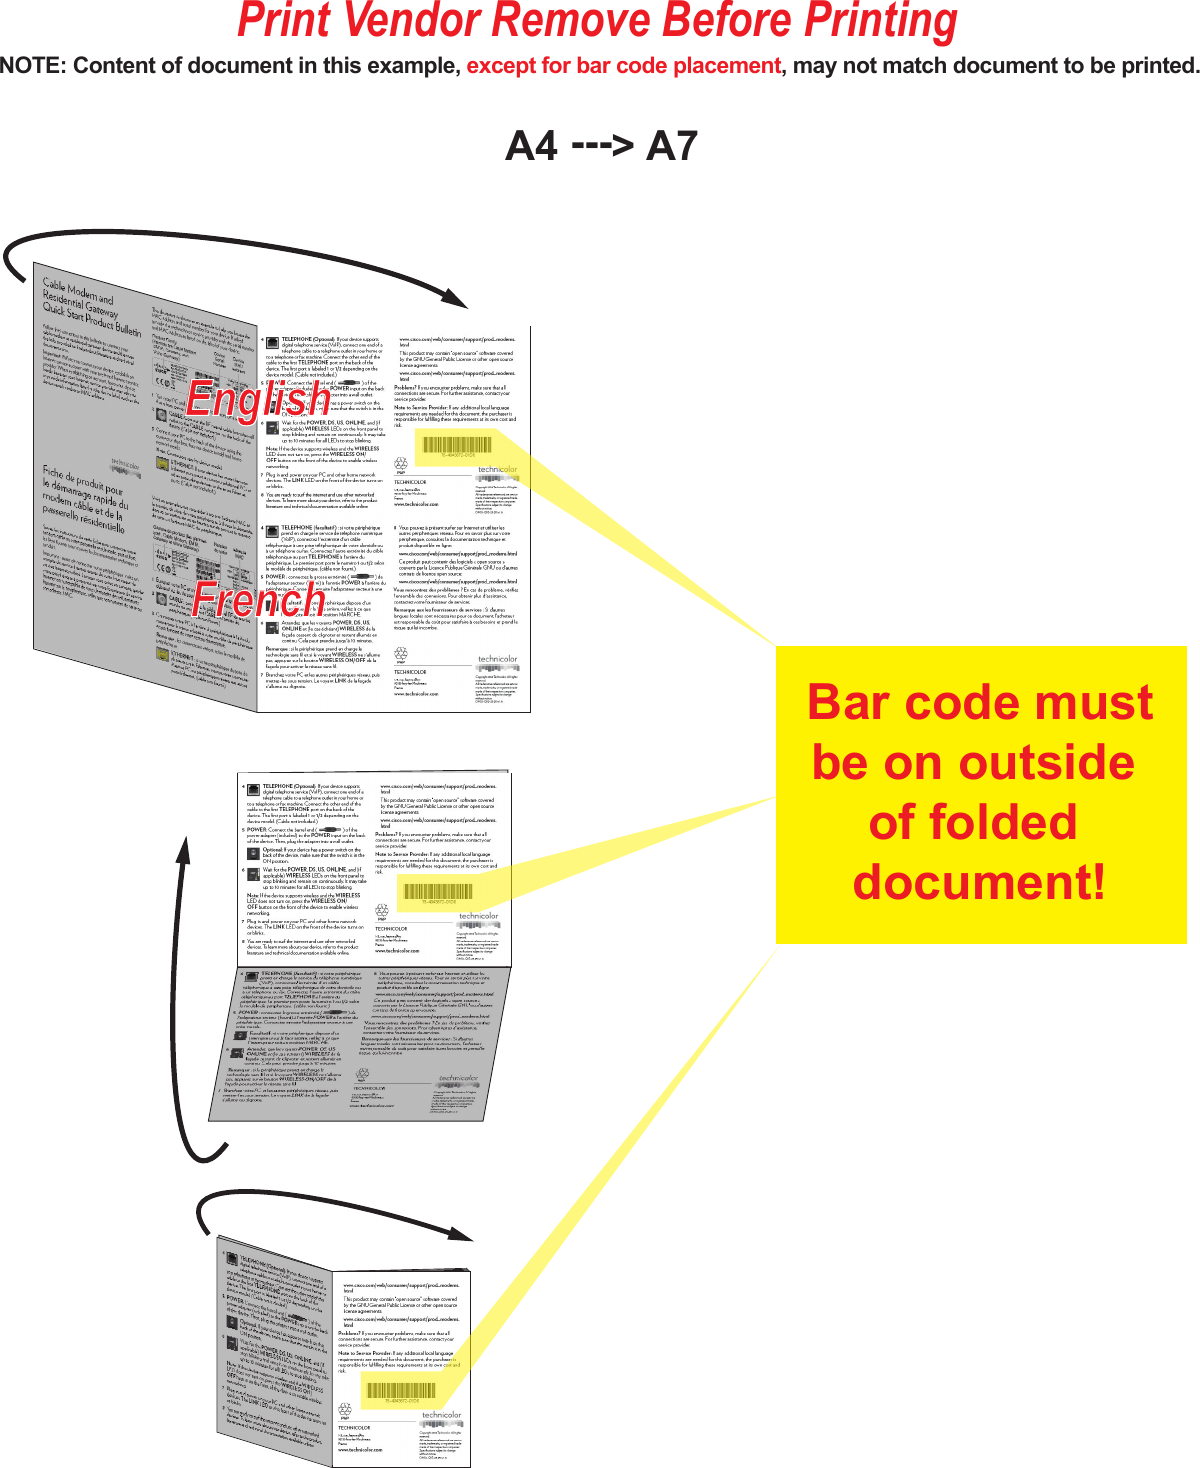 A4 ---&gt; A7Print Vendor Remove Before Printing NOTE: Content of document in this example, except for bar code placement, may not match document to be printed. EnglishFrenchBar code mustbe on outside of folded document!